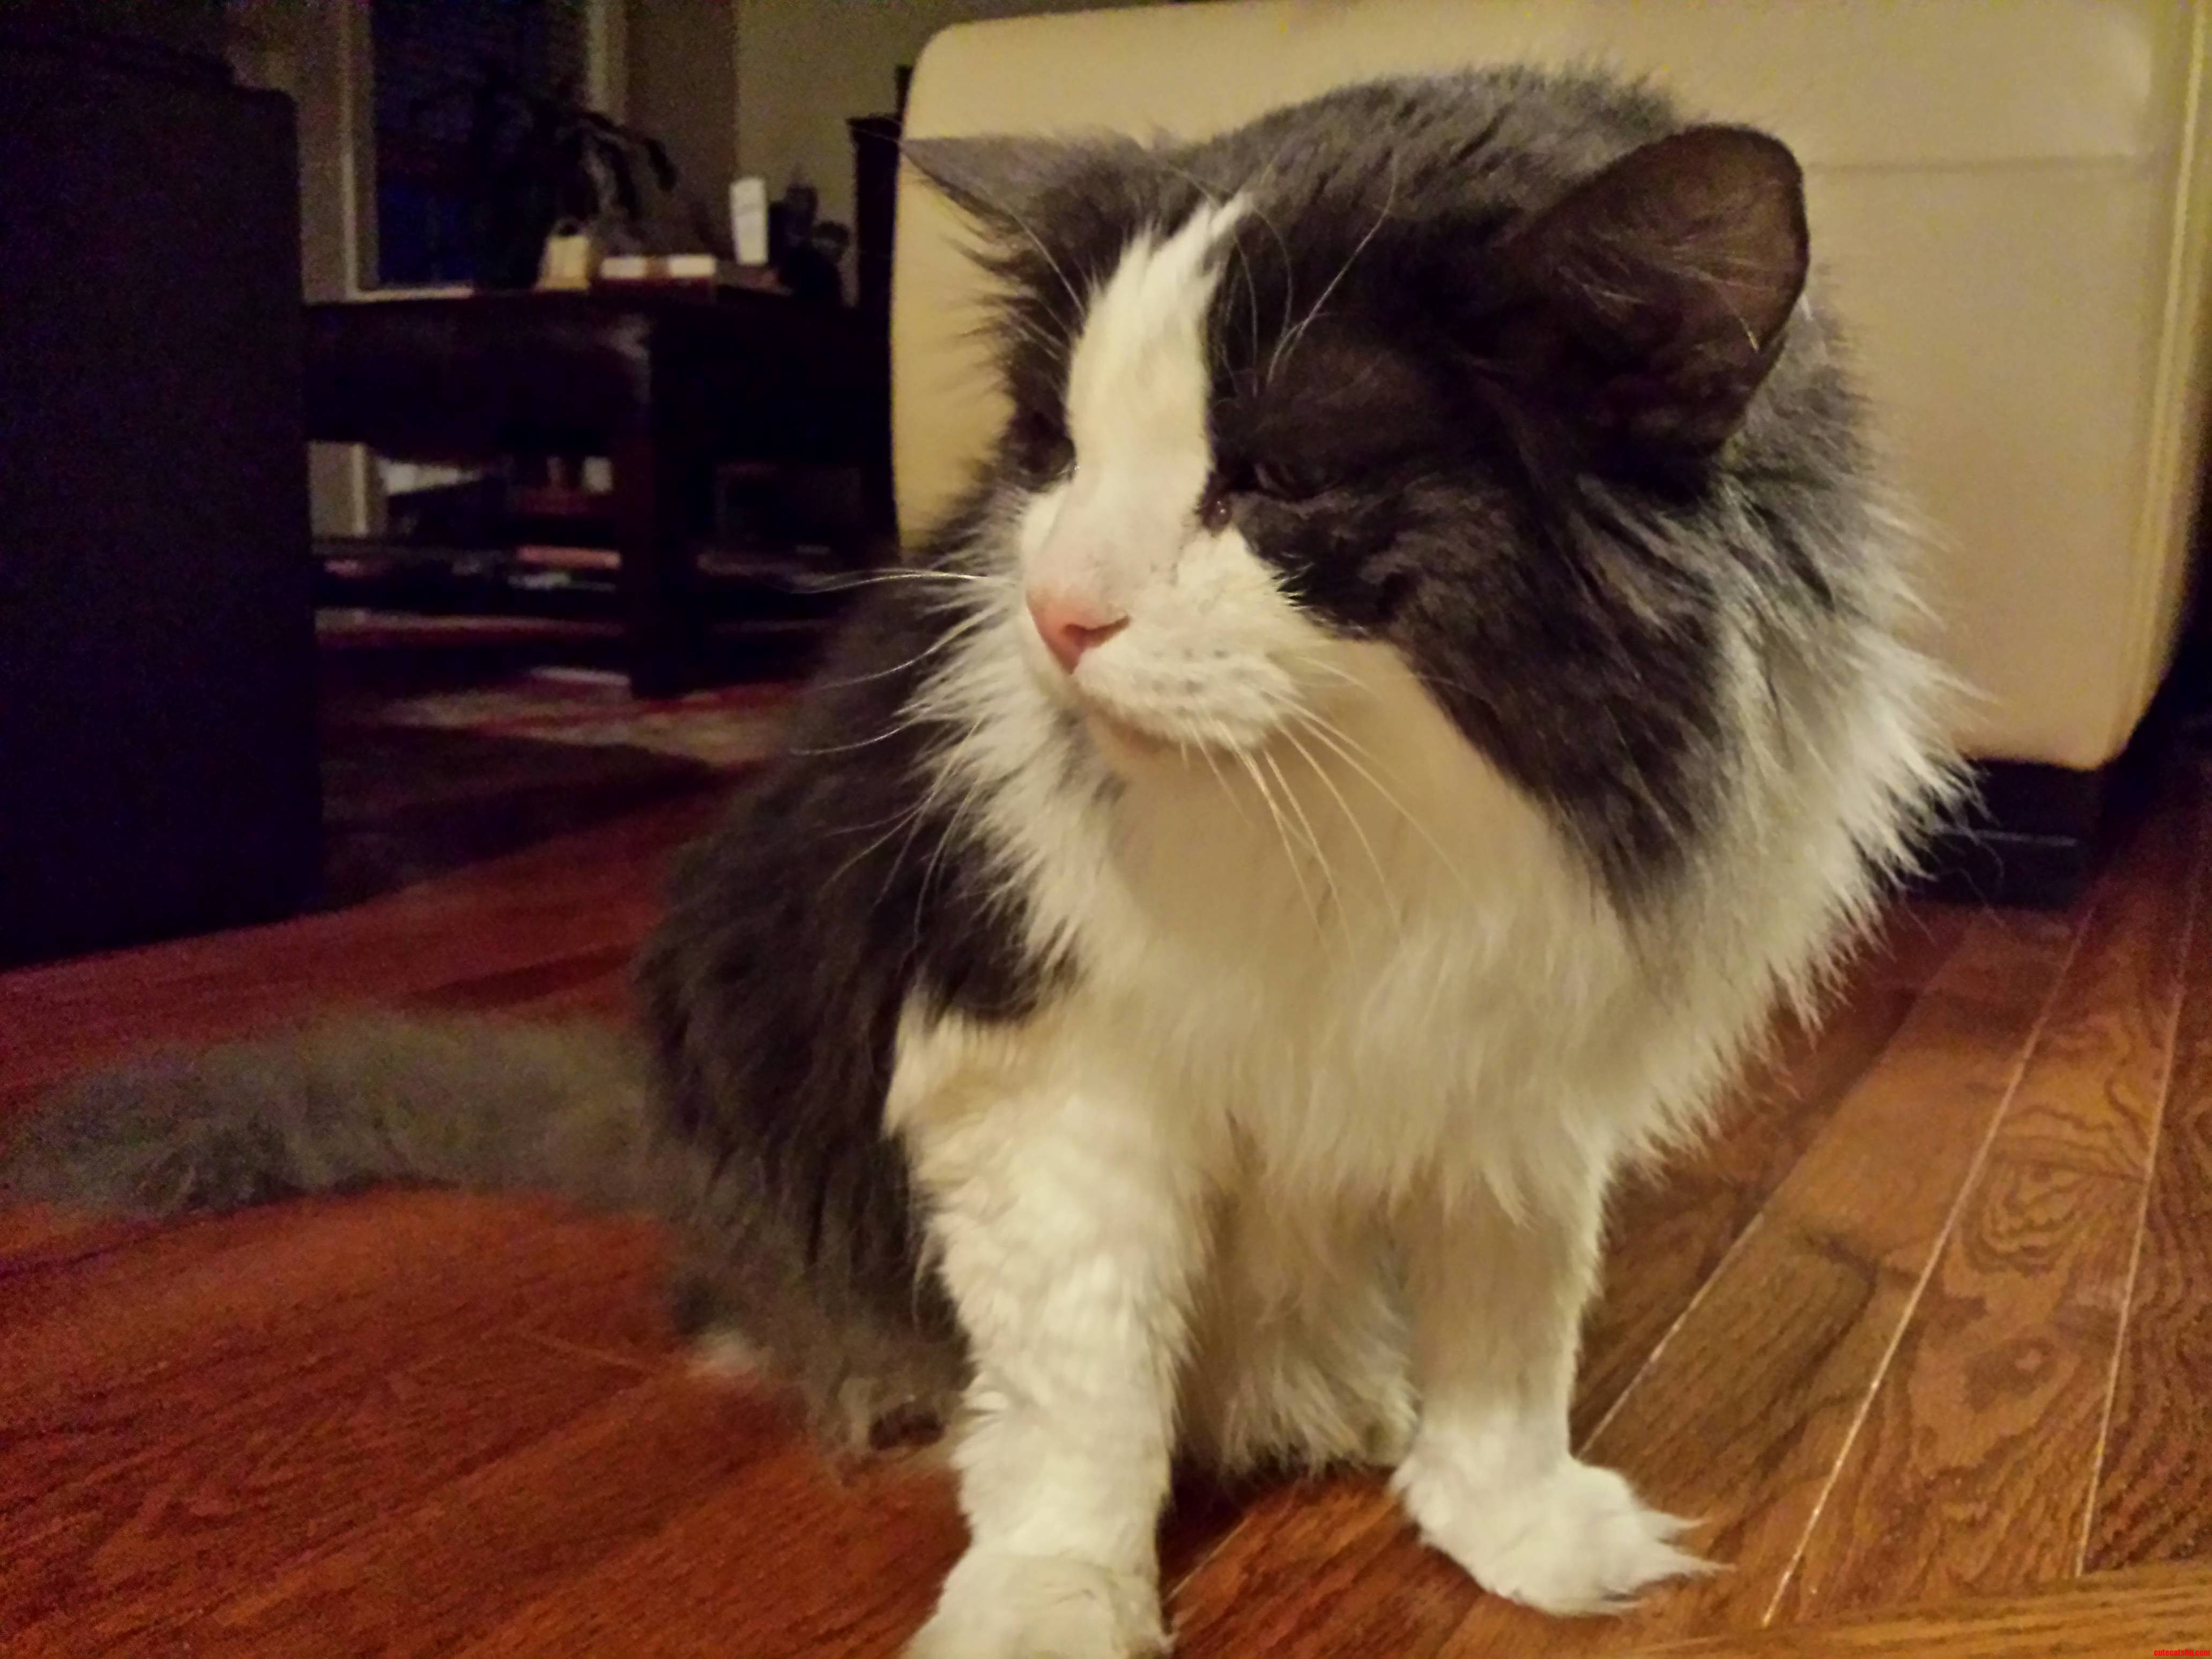 20 Years Old Diabetic And Teary-Eyed Hes Still A Majestic Beast.